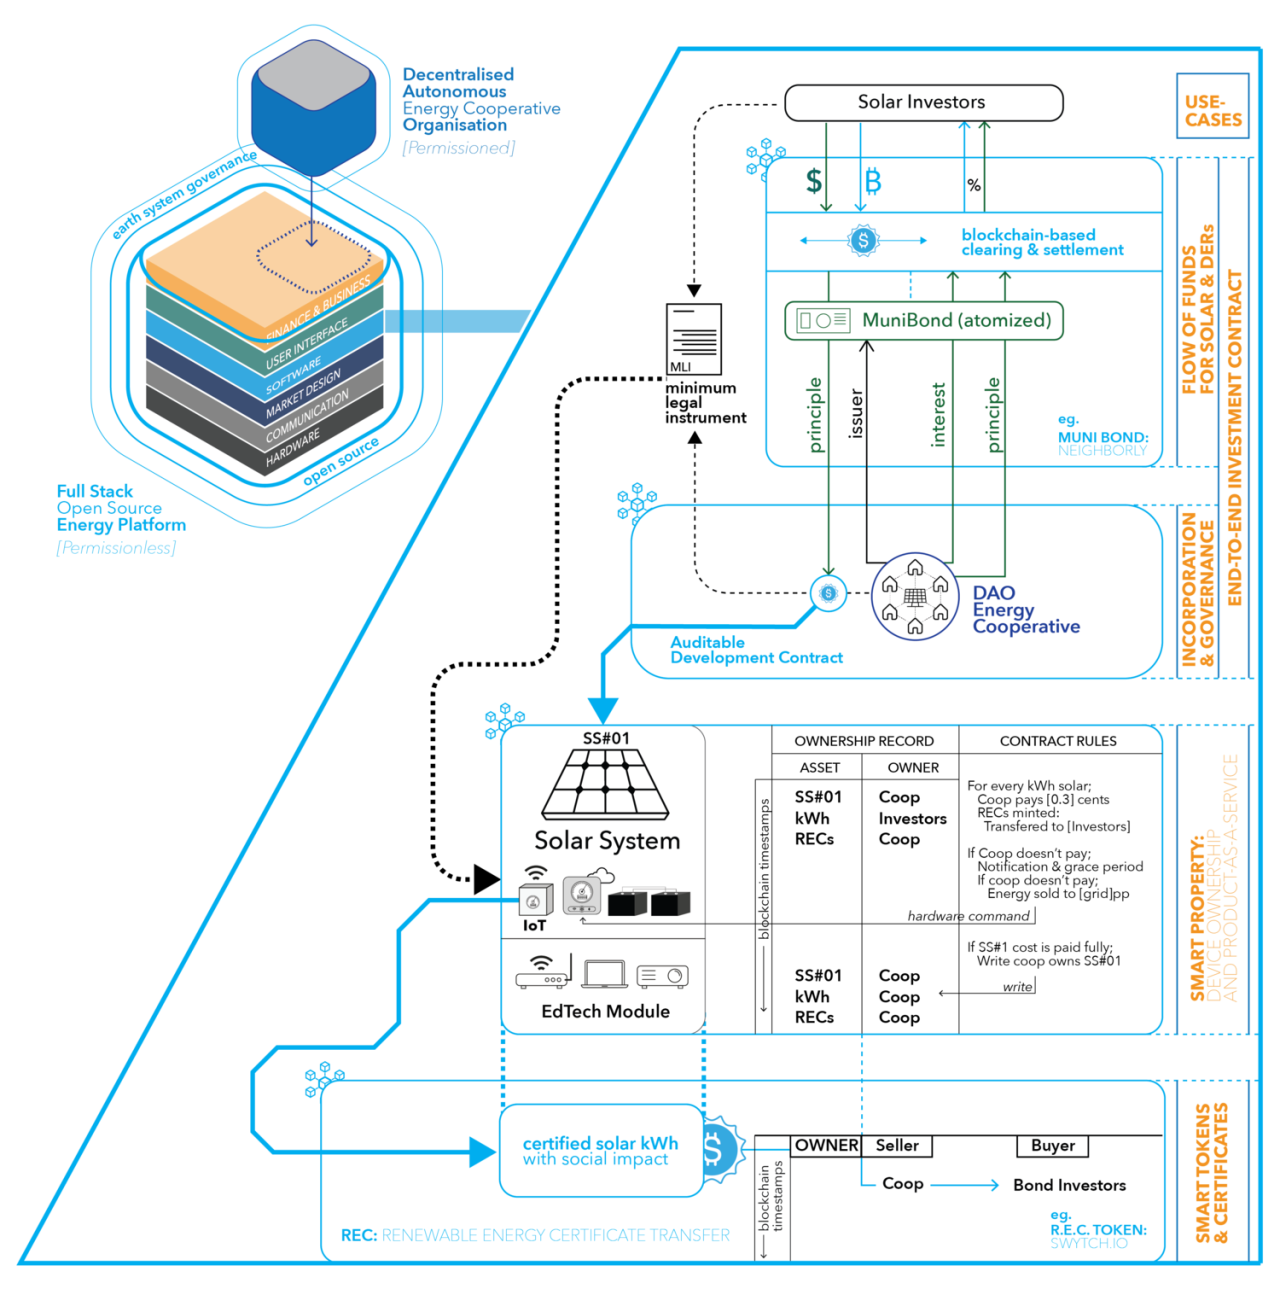 Diagram of openlab systems architecture